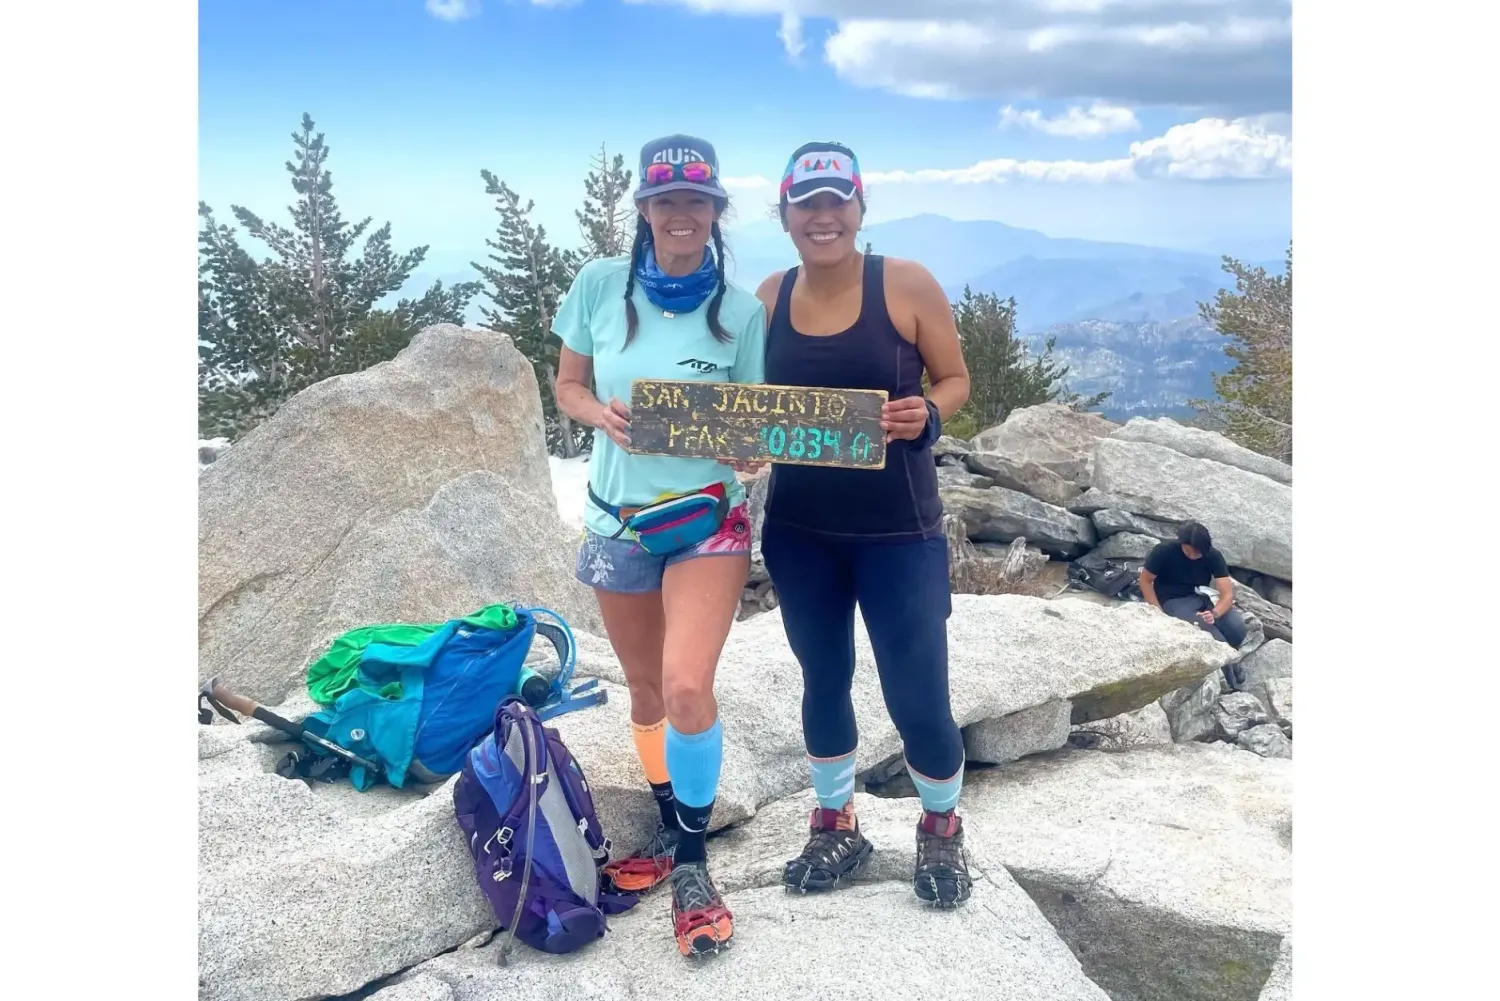 two women, one being cyndi wyatt, holding a sign of the summit of a peak, the sign reads :"San Jacinto peak 10,834 feet"